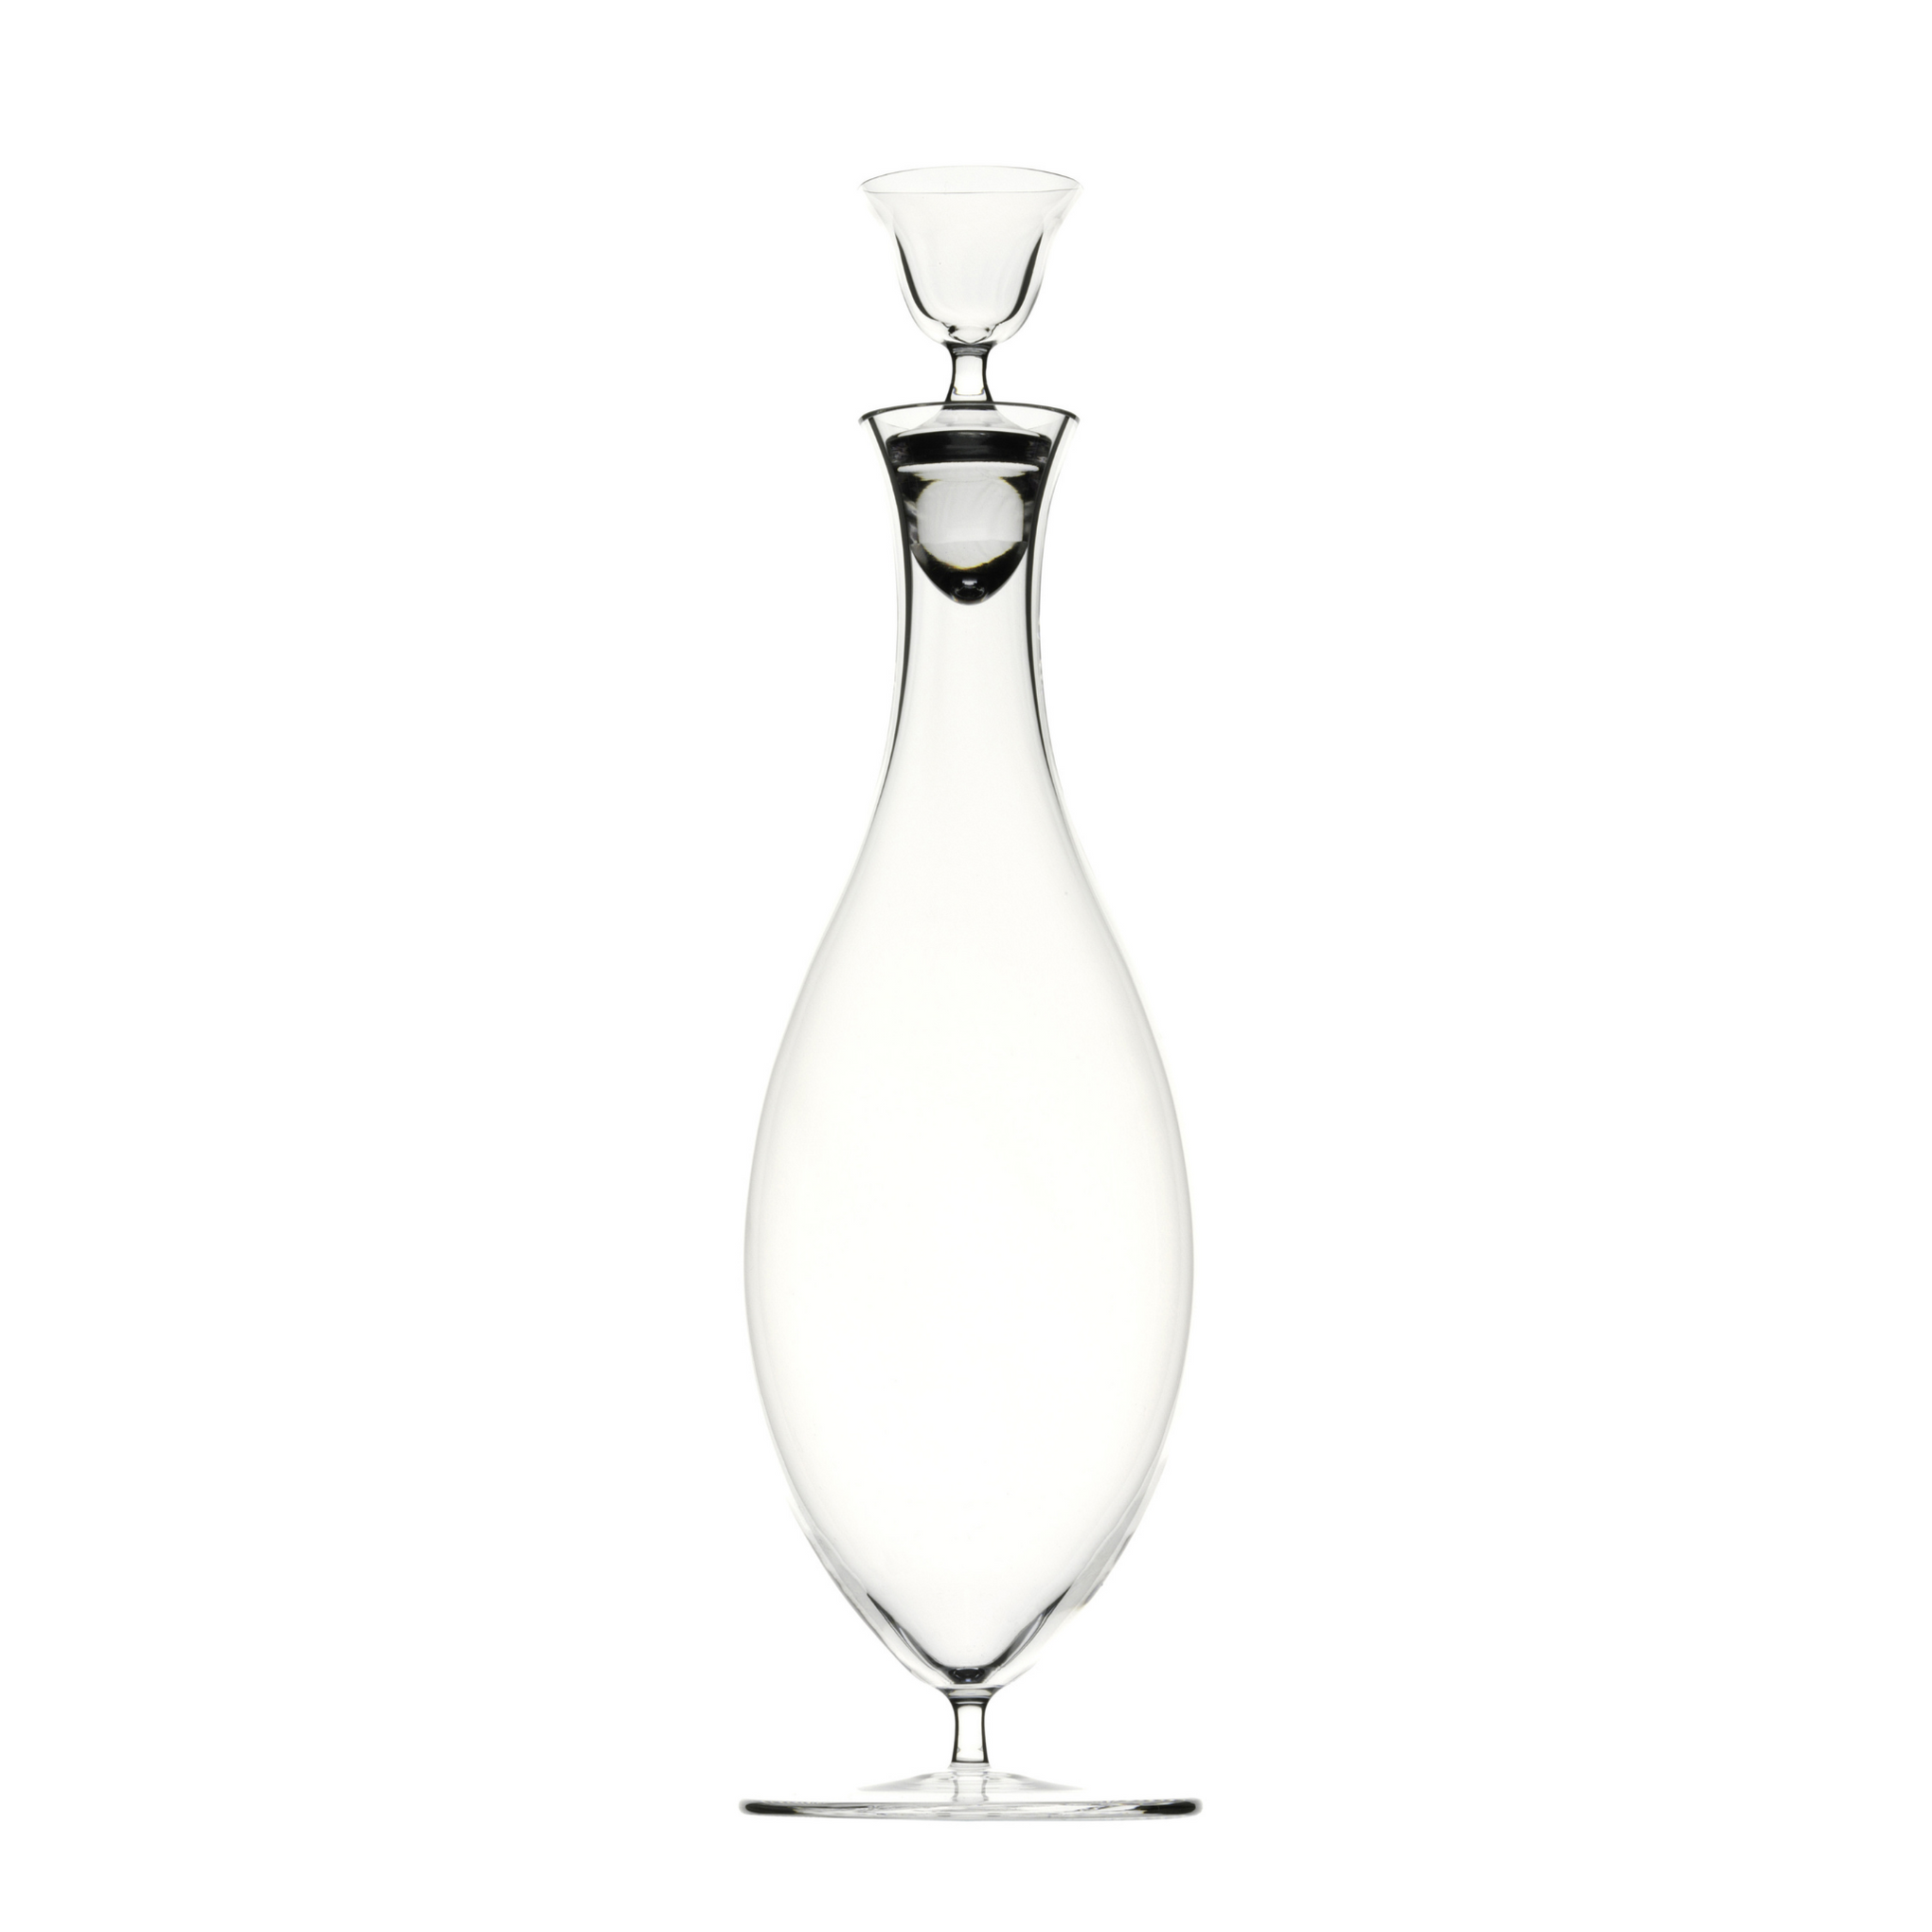 JOSEF HOFFMAN PATRICIAN CRYSTAL DECANTER WITH STOPPER